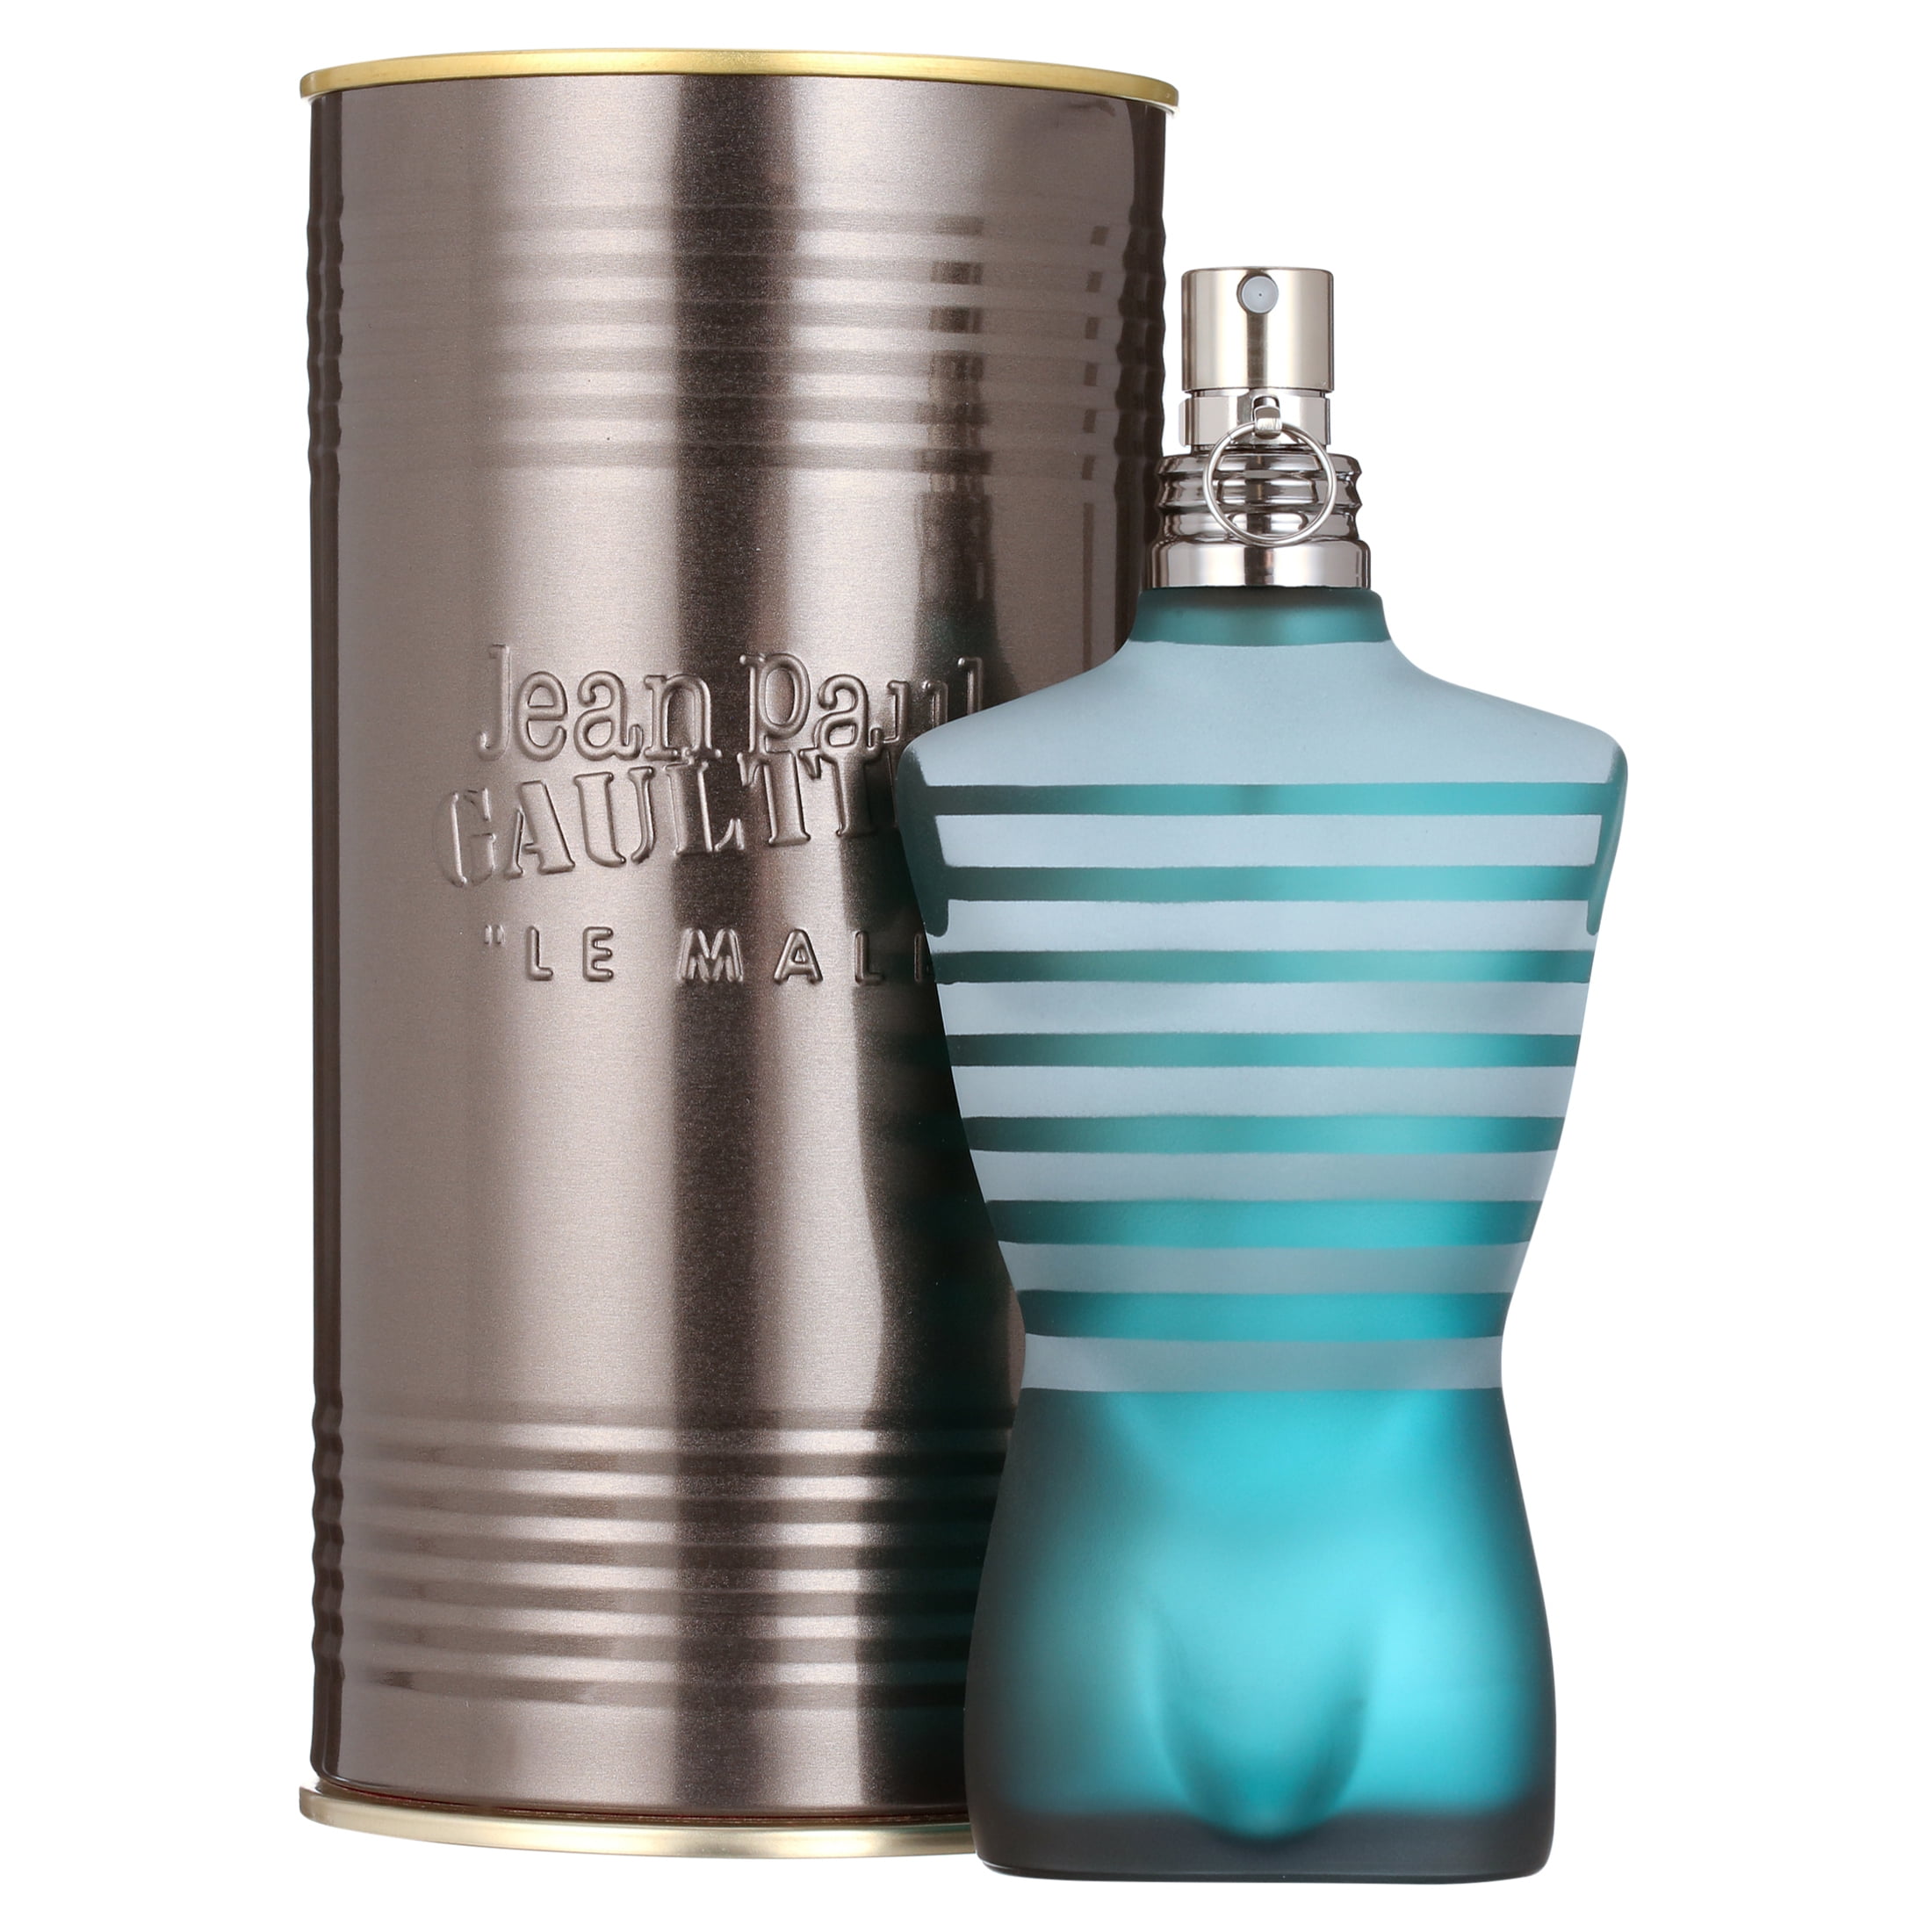 Jean Paul Gaultier Eau de Toilette Spray 4.2 oz for Men 100% Authentic Perfect As A Gift or Just Everyday Use